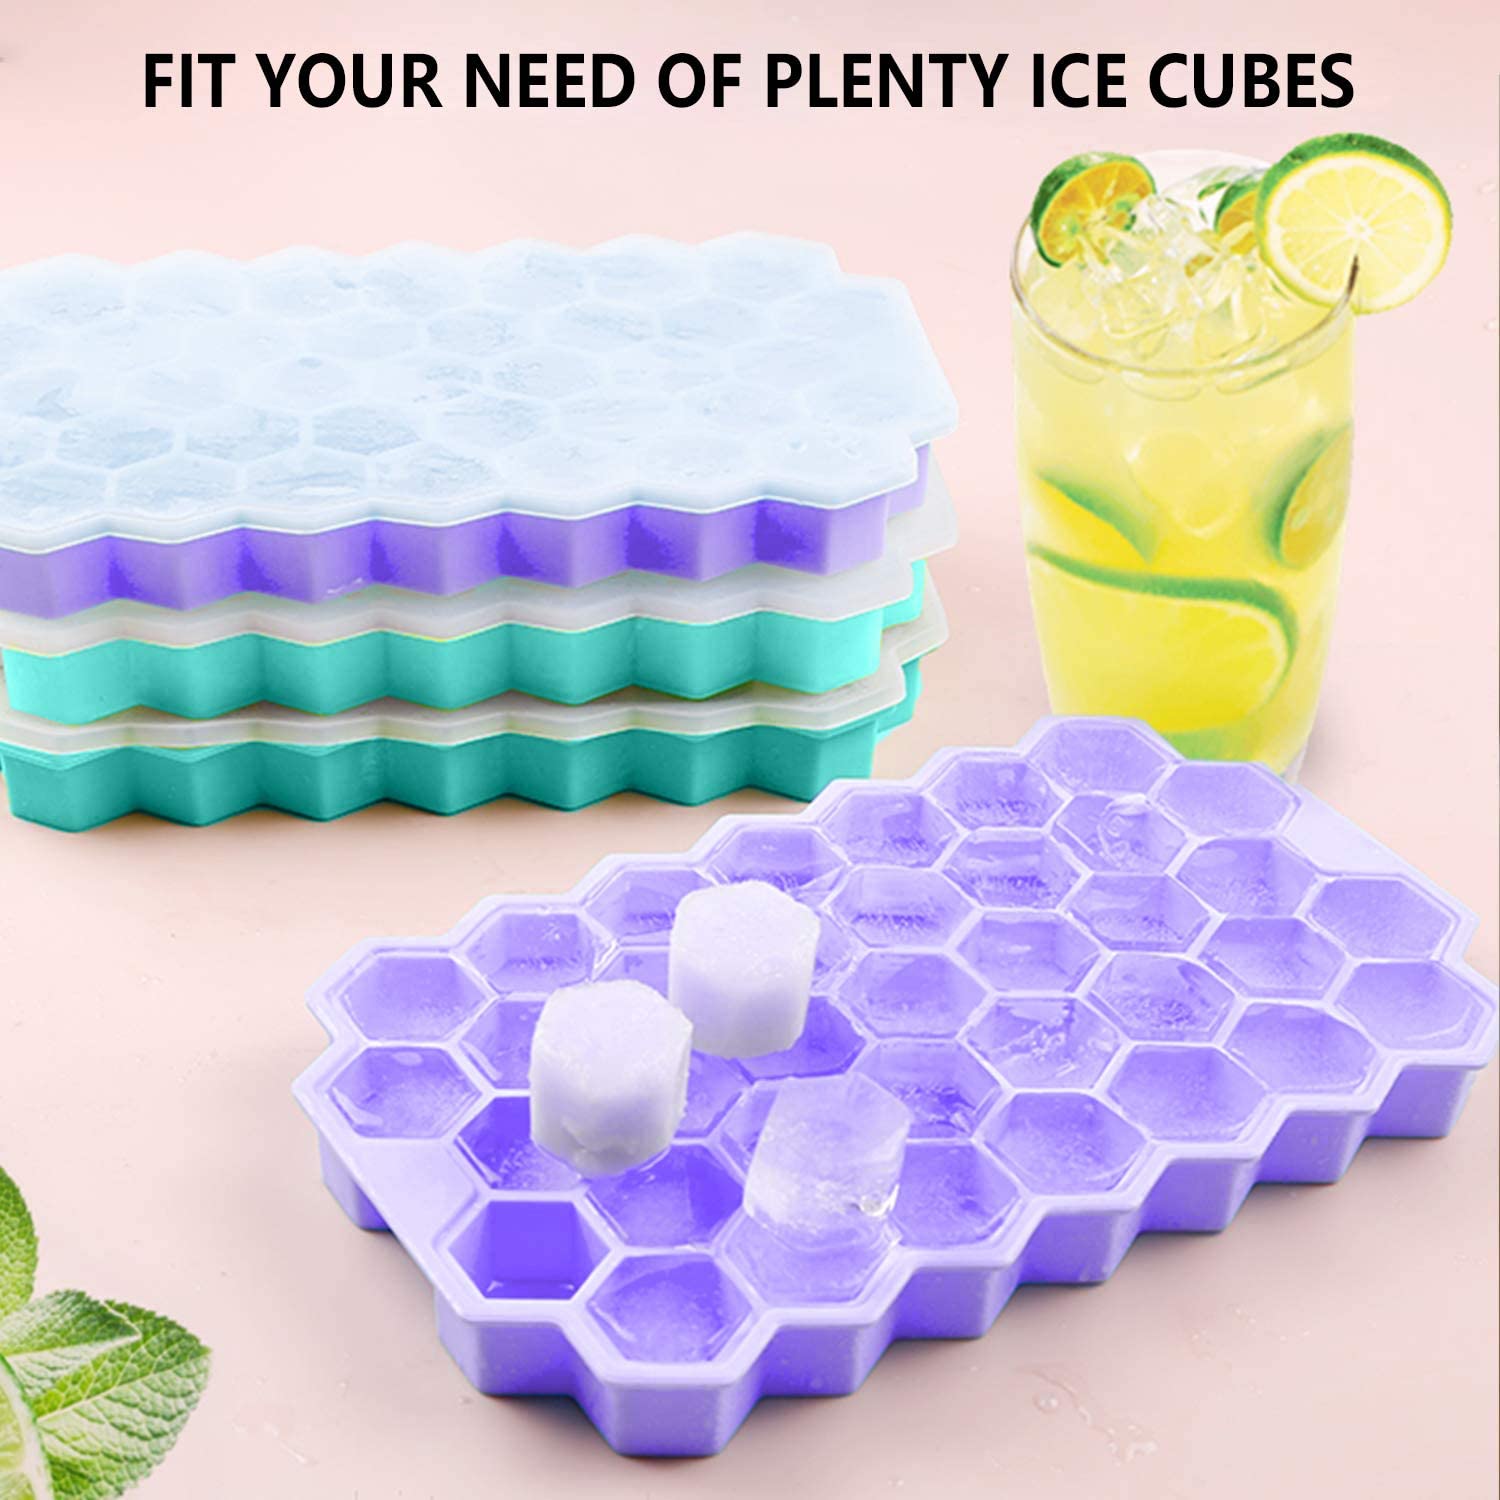 Treamon Upgrade Ice Cube Trays, 2 Pack Silicone Flexible Ice Cube Trays with Lid, 76 Cubes Ice Trays for Chilled Drinks, Whiskey & Cocktails, Stackable Flexible Safe Ice Cube Trays2